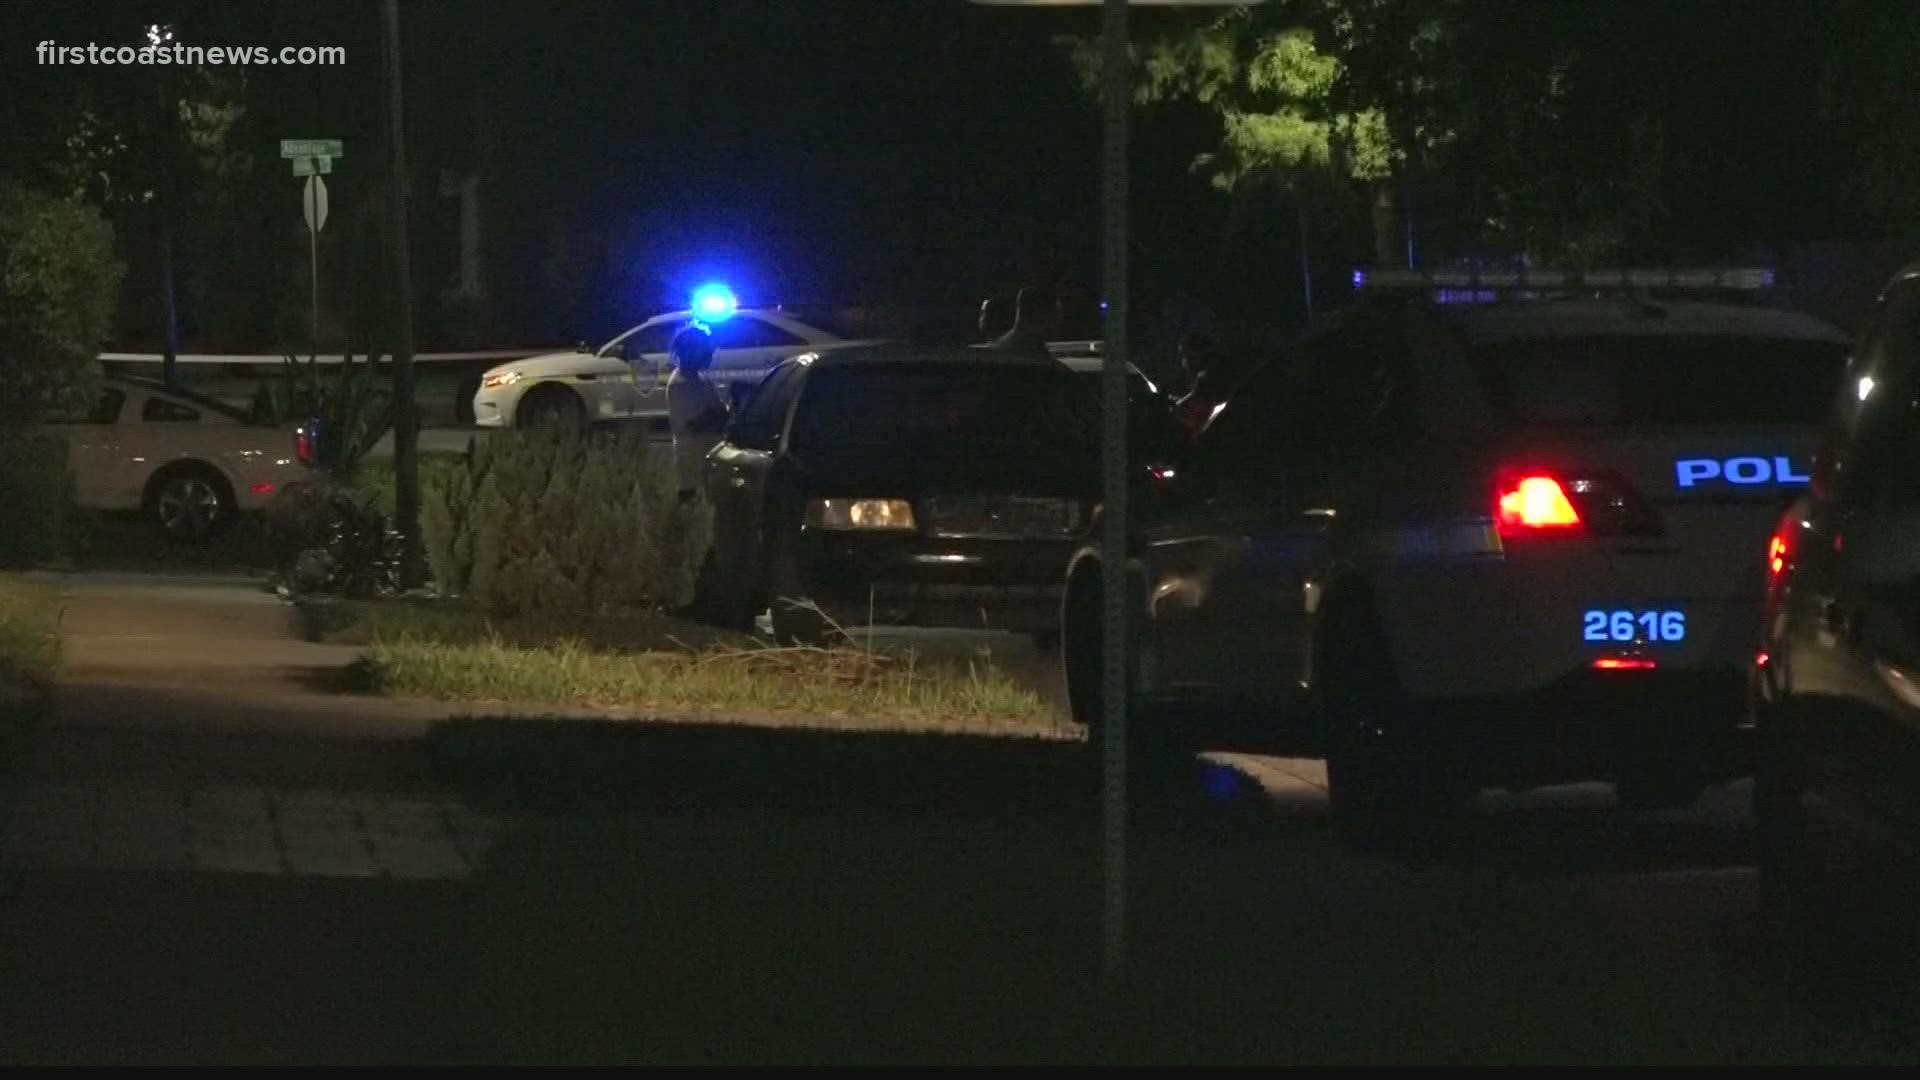 JSO was called to the 7500 block of International Village Drive around 11:40 p.m. Wednesday. The child was taken to the hospital with non-life-threatening injuries.